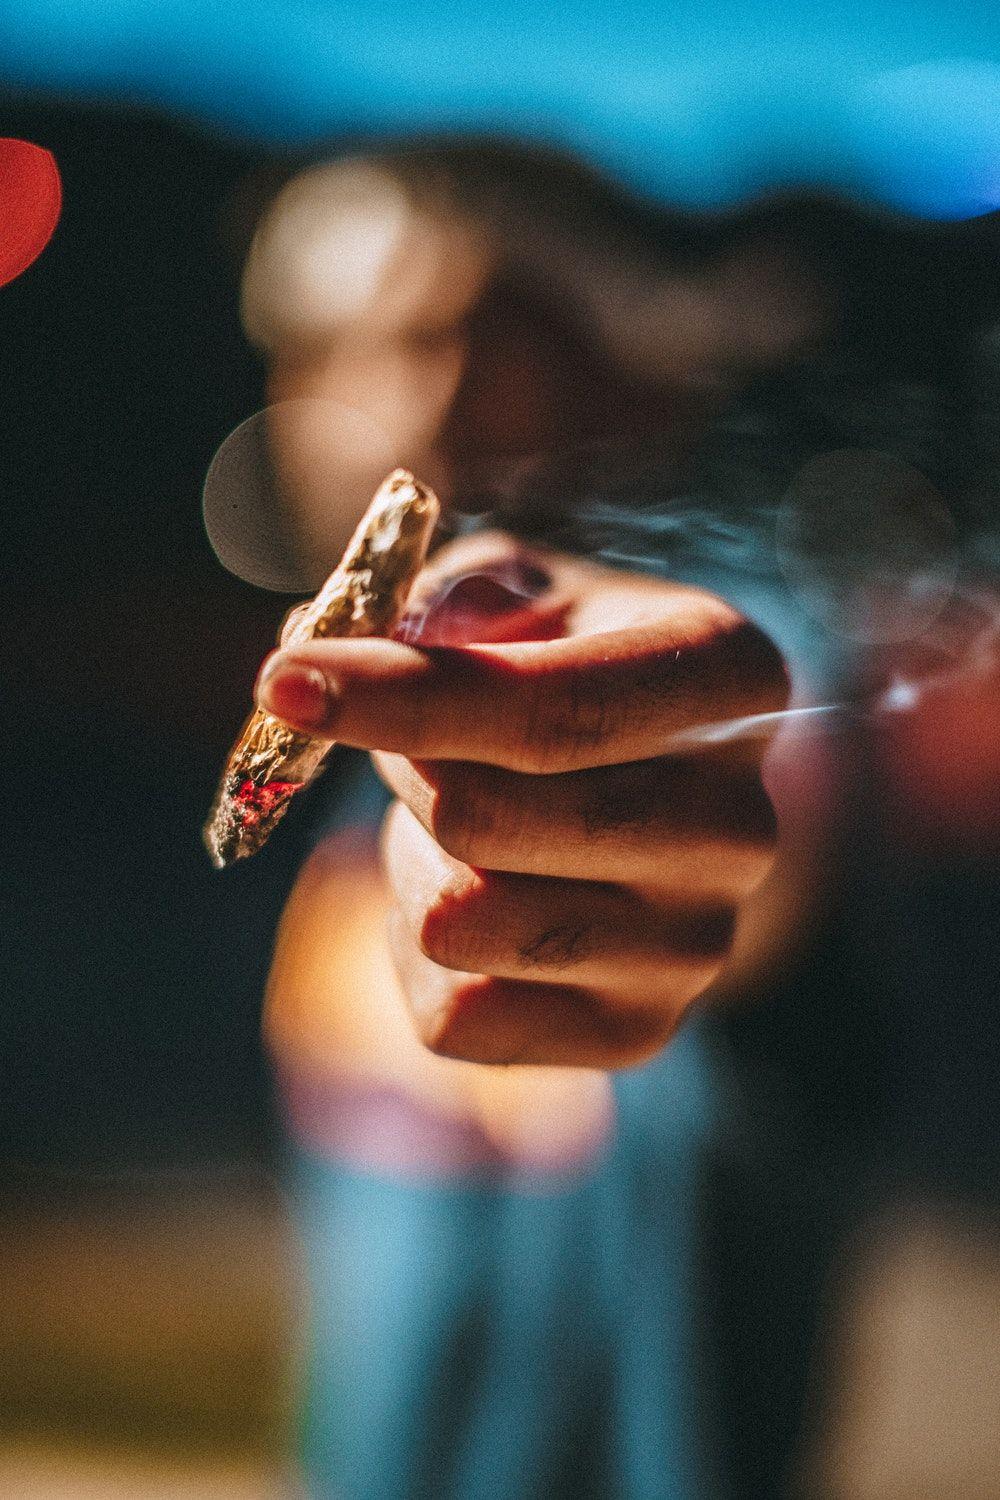 Blunt Picture [HD]. Download Free Image